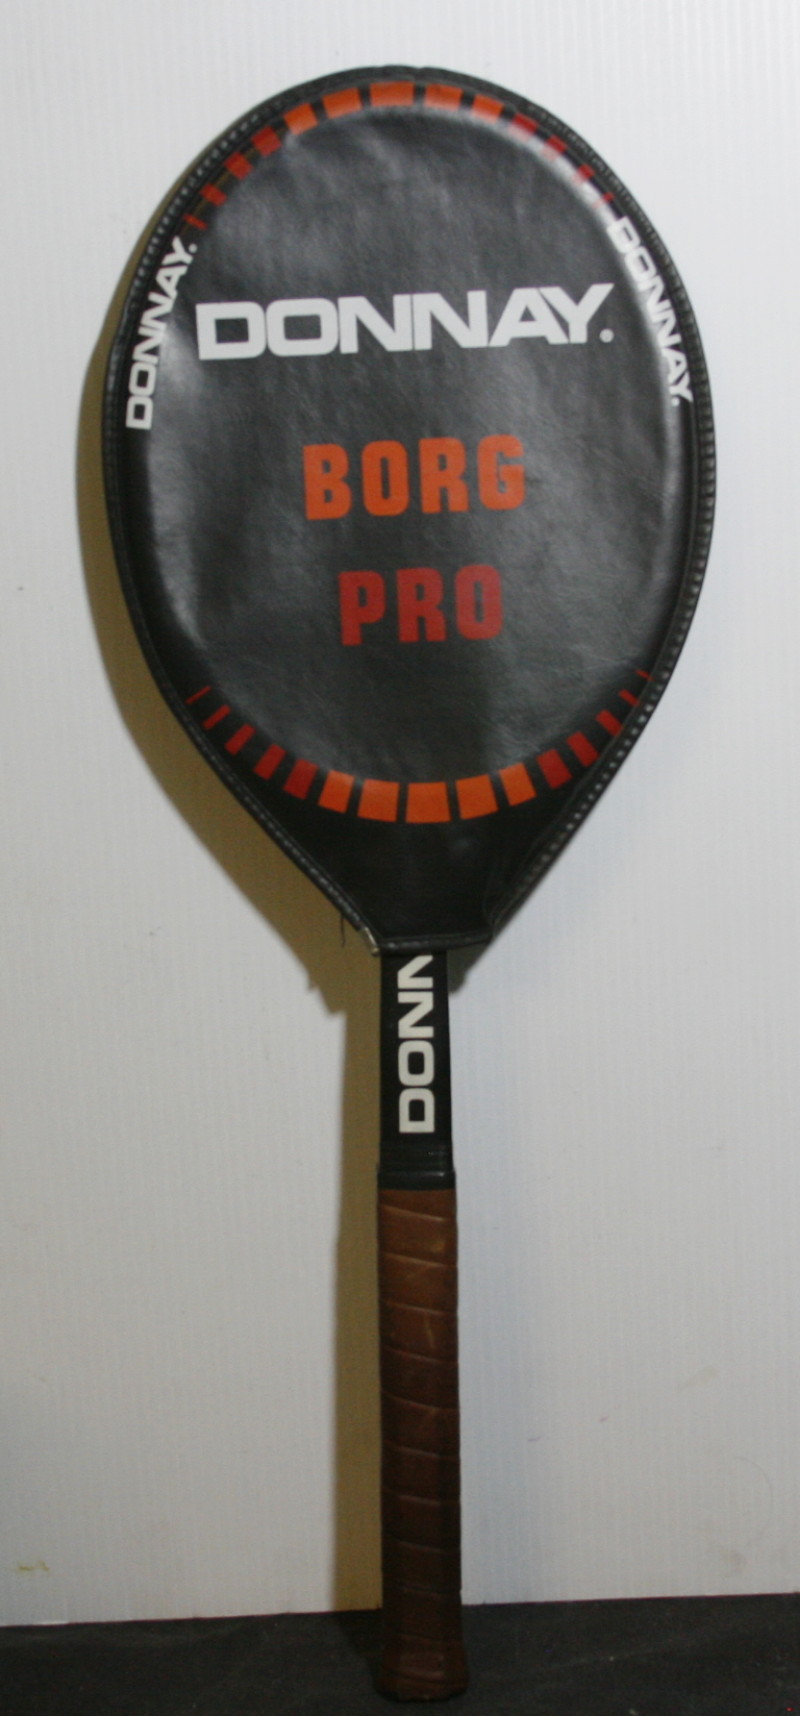 Donnay Borg Pro Tennis Racquet With Original Head Cover - Light 3 - Made in Bel